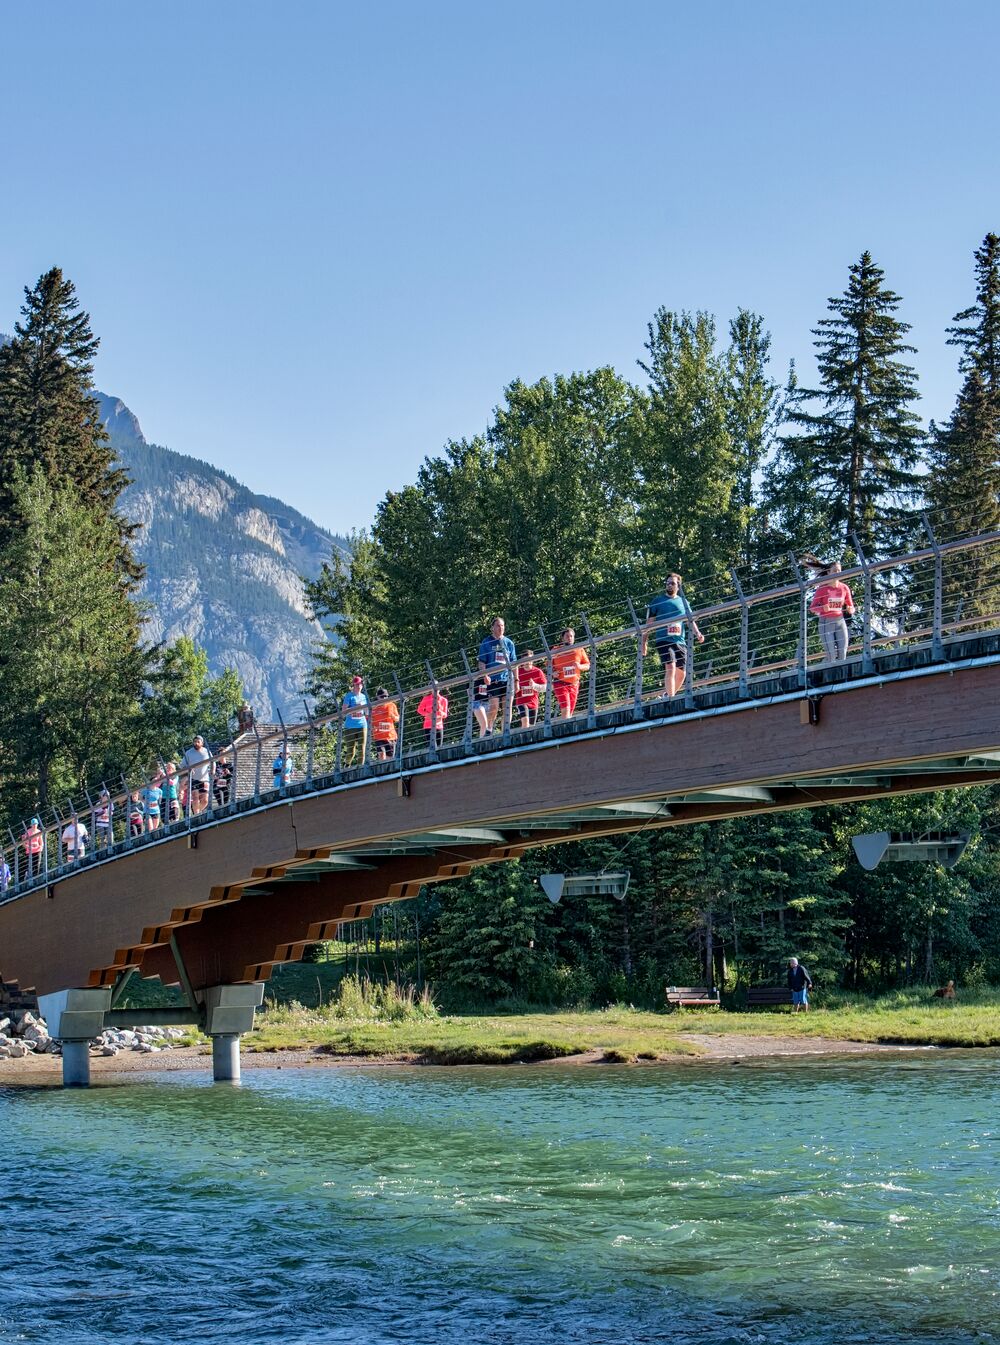 A group of runners participating in a marathon run across a pedestrian bridge over the Bow River with Cascade Mountain behind them on a clear summer day